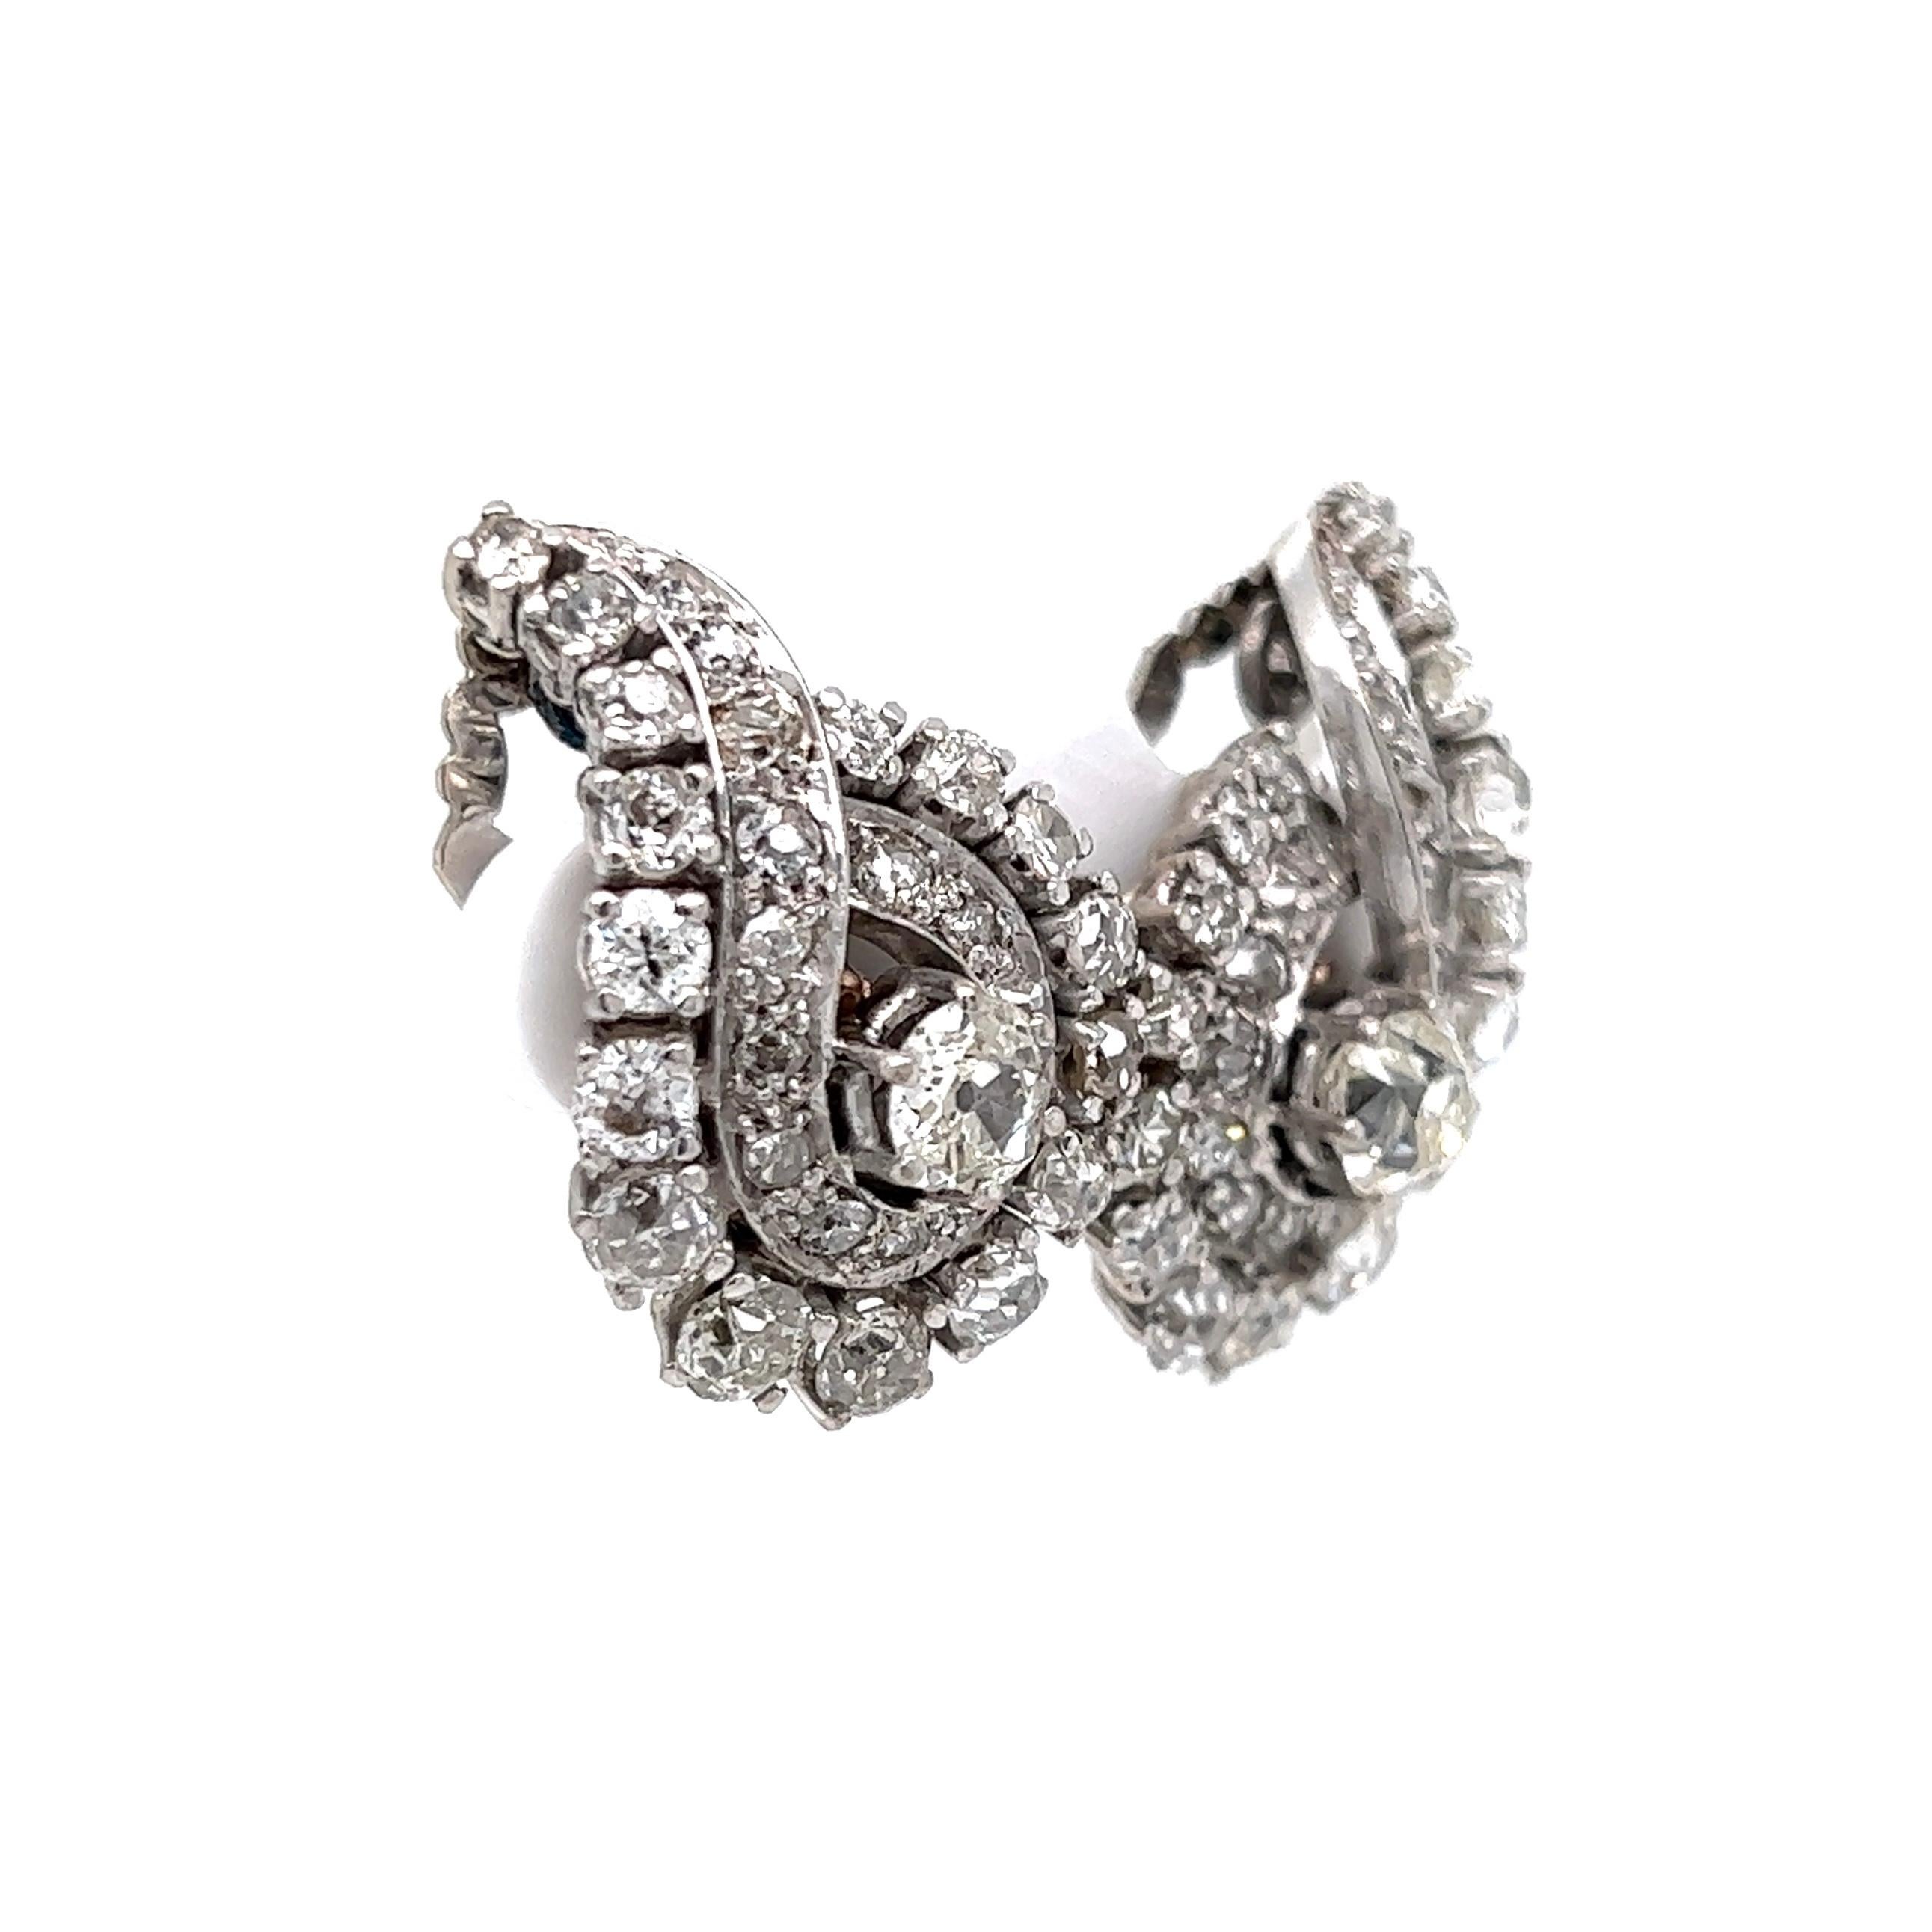 Simply Beautiful! High Quality Diamond Platinum Designer Cluster Earrings. Securely Hand set with Diamonds weighing approx. 5.35tcw. 2 Old Mine-Cut Diamonds approx. 1.00tcw and 60 Old-cut Diamonds, weighing approx. 4.35tcw. Approx. Dimensions 1.1